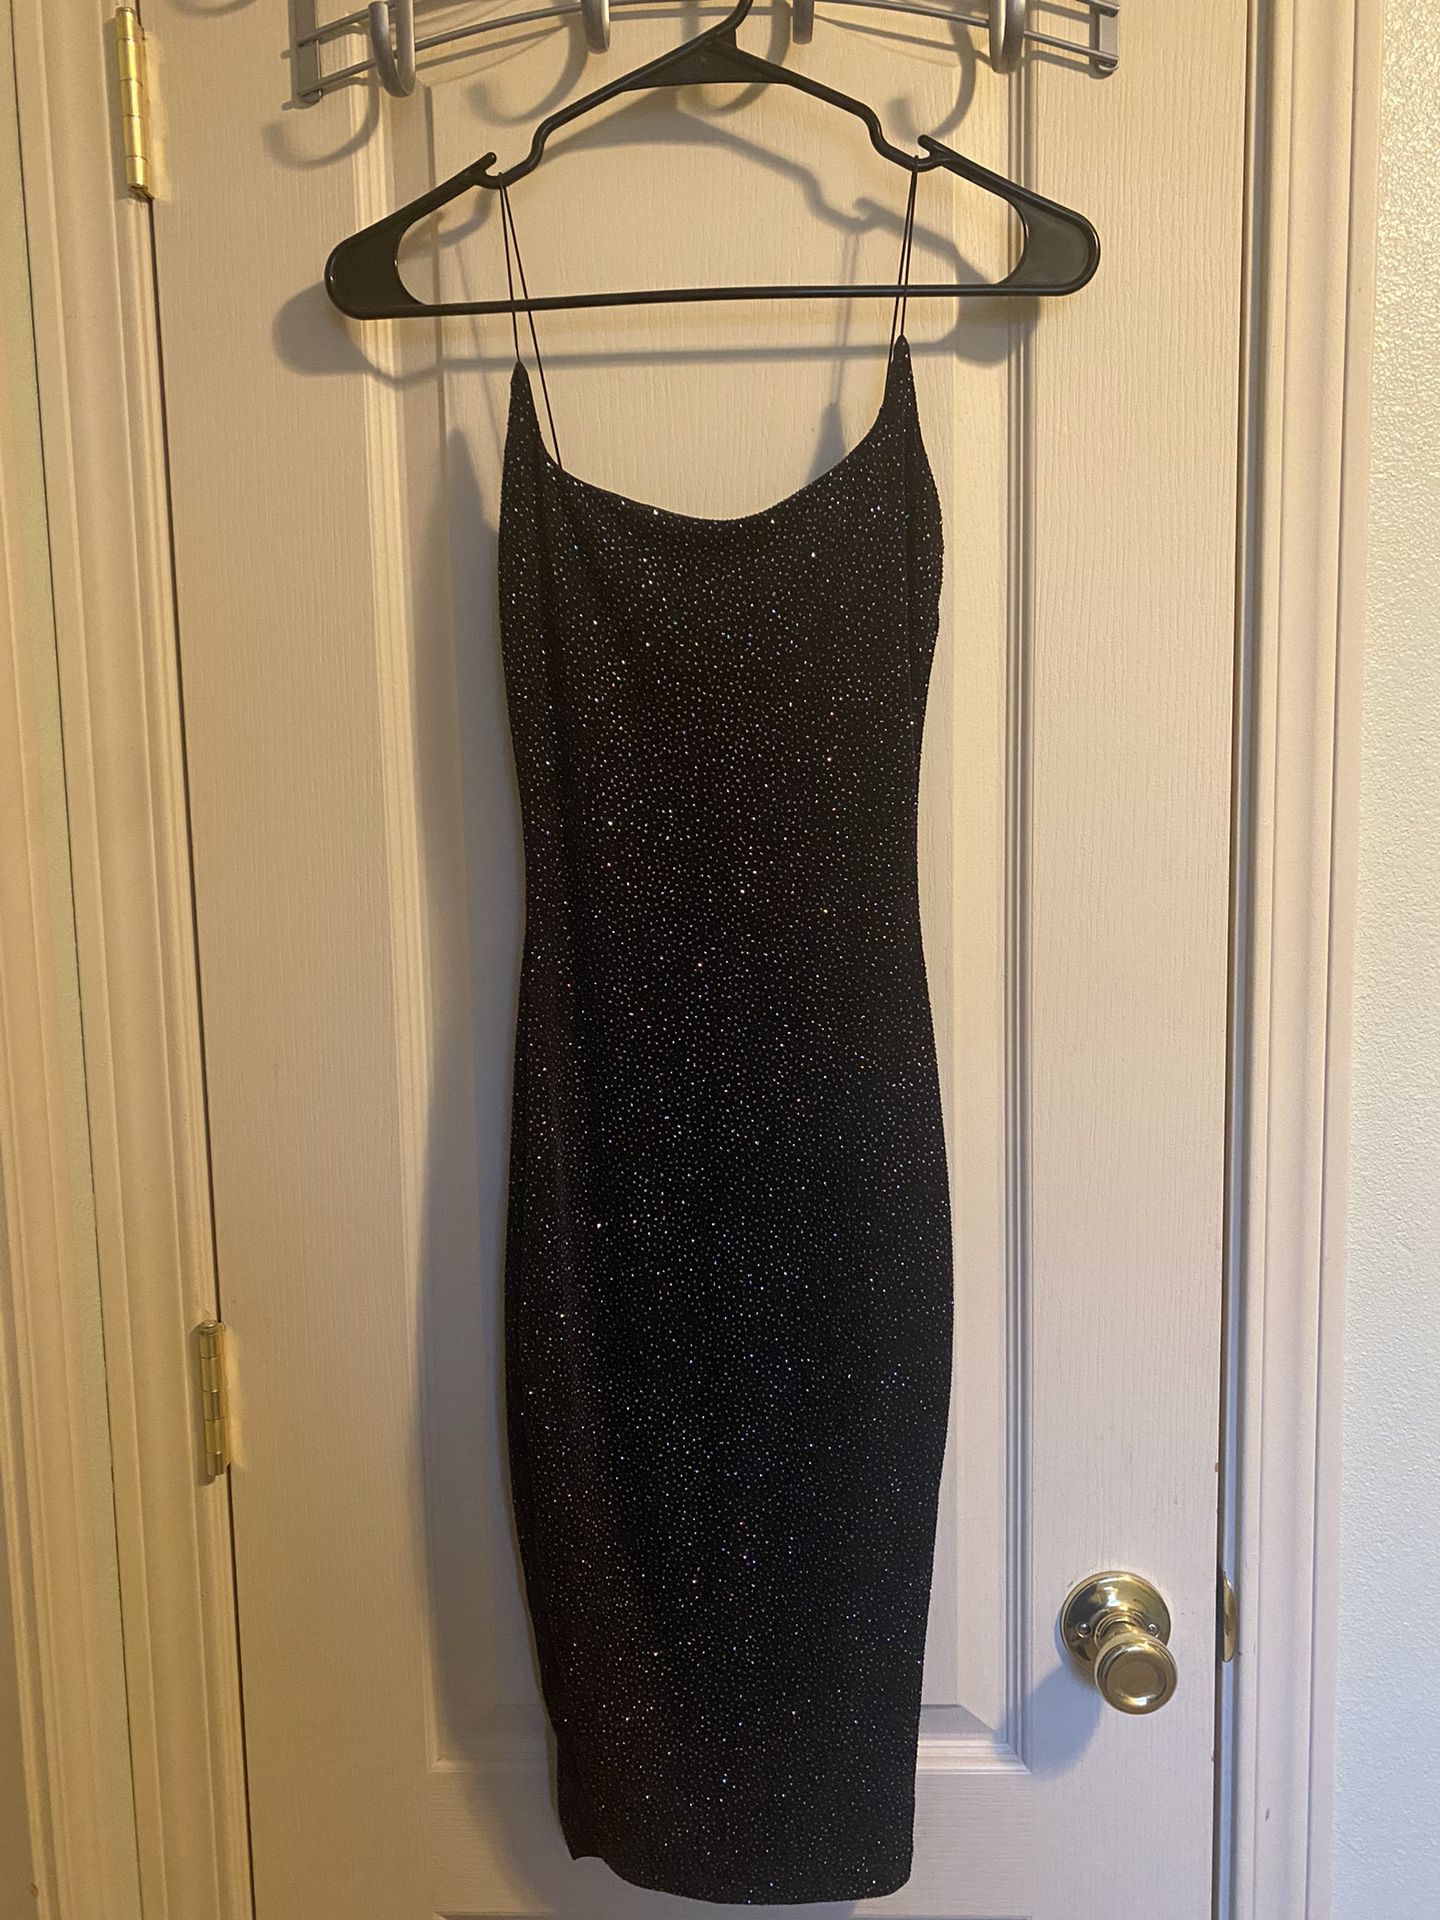 Windsor, Dress, Black With Sparkles, Small